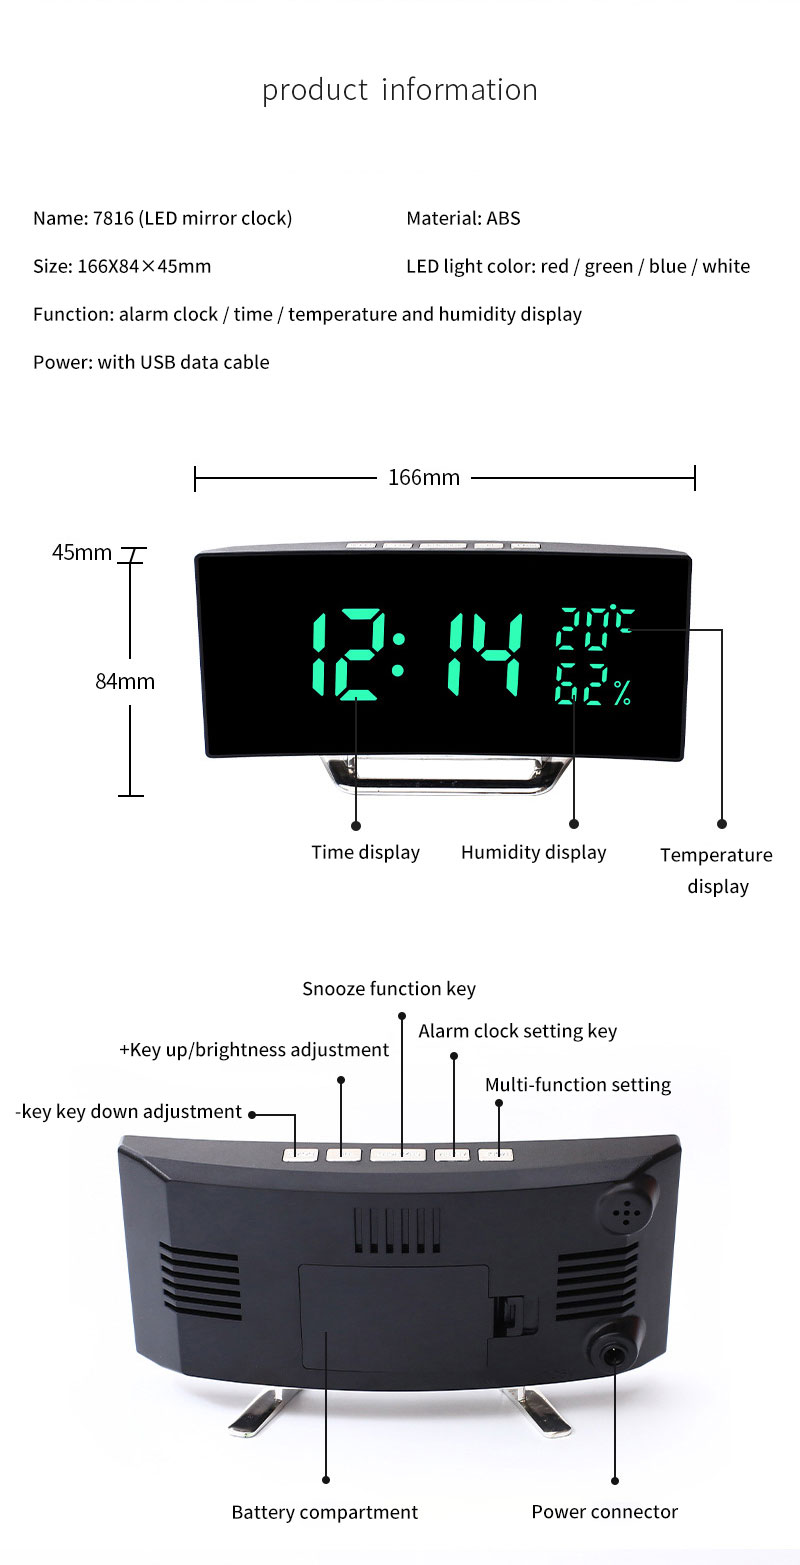 Product information for table clock